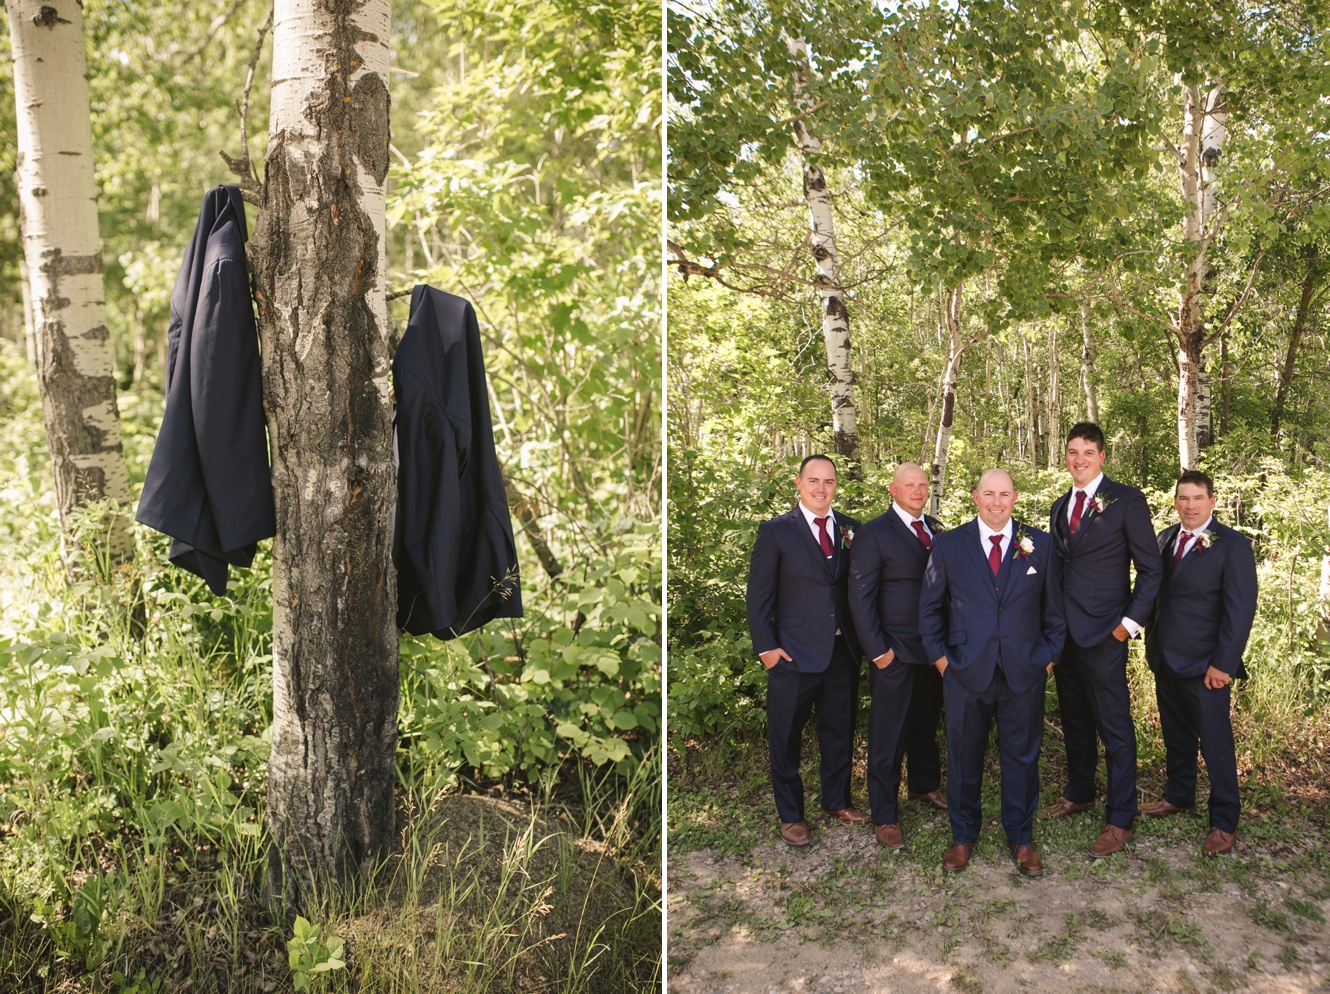 How to post groomsmen at a wedding